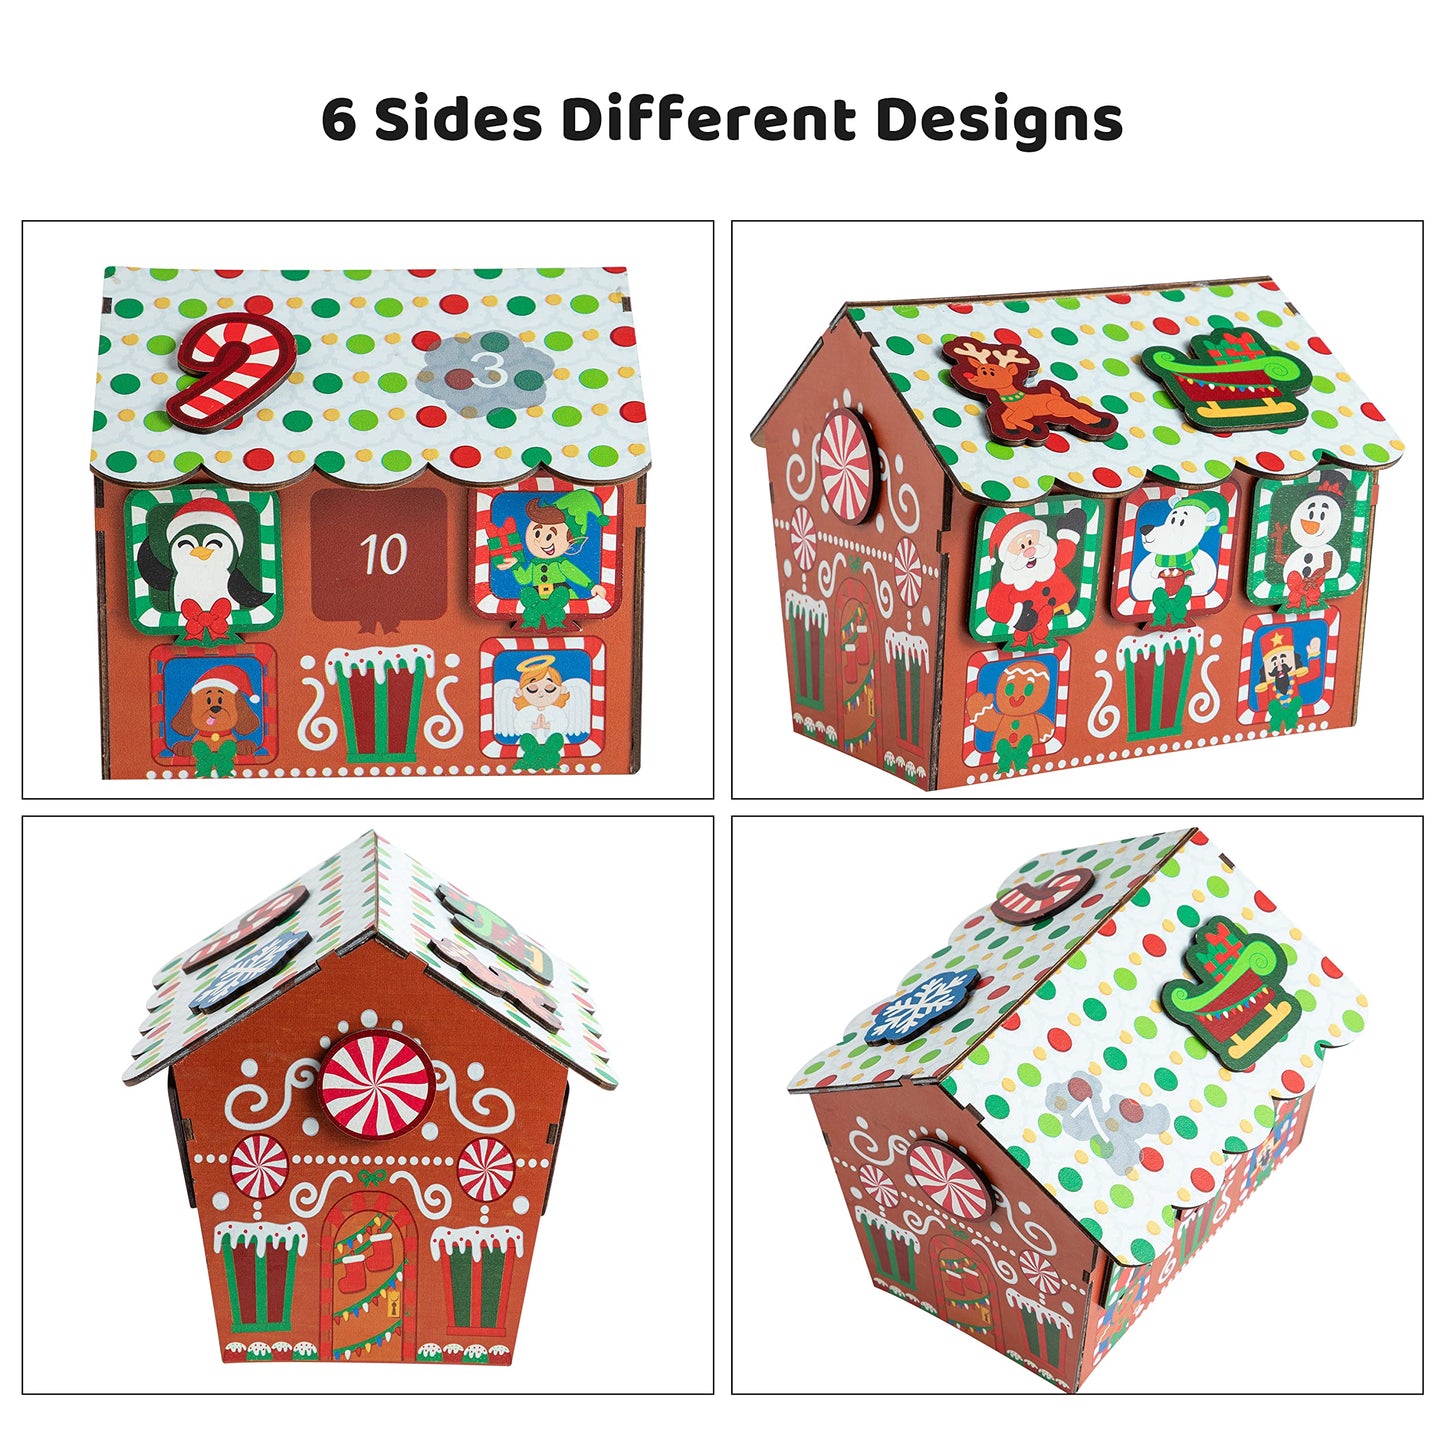 Magnetic Wooden Gingerbread House Advent Calendar